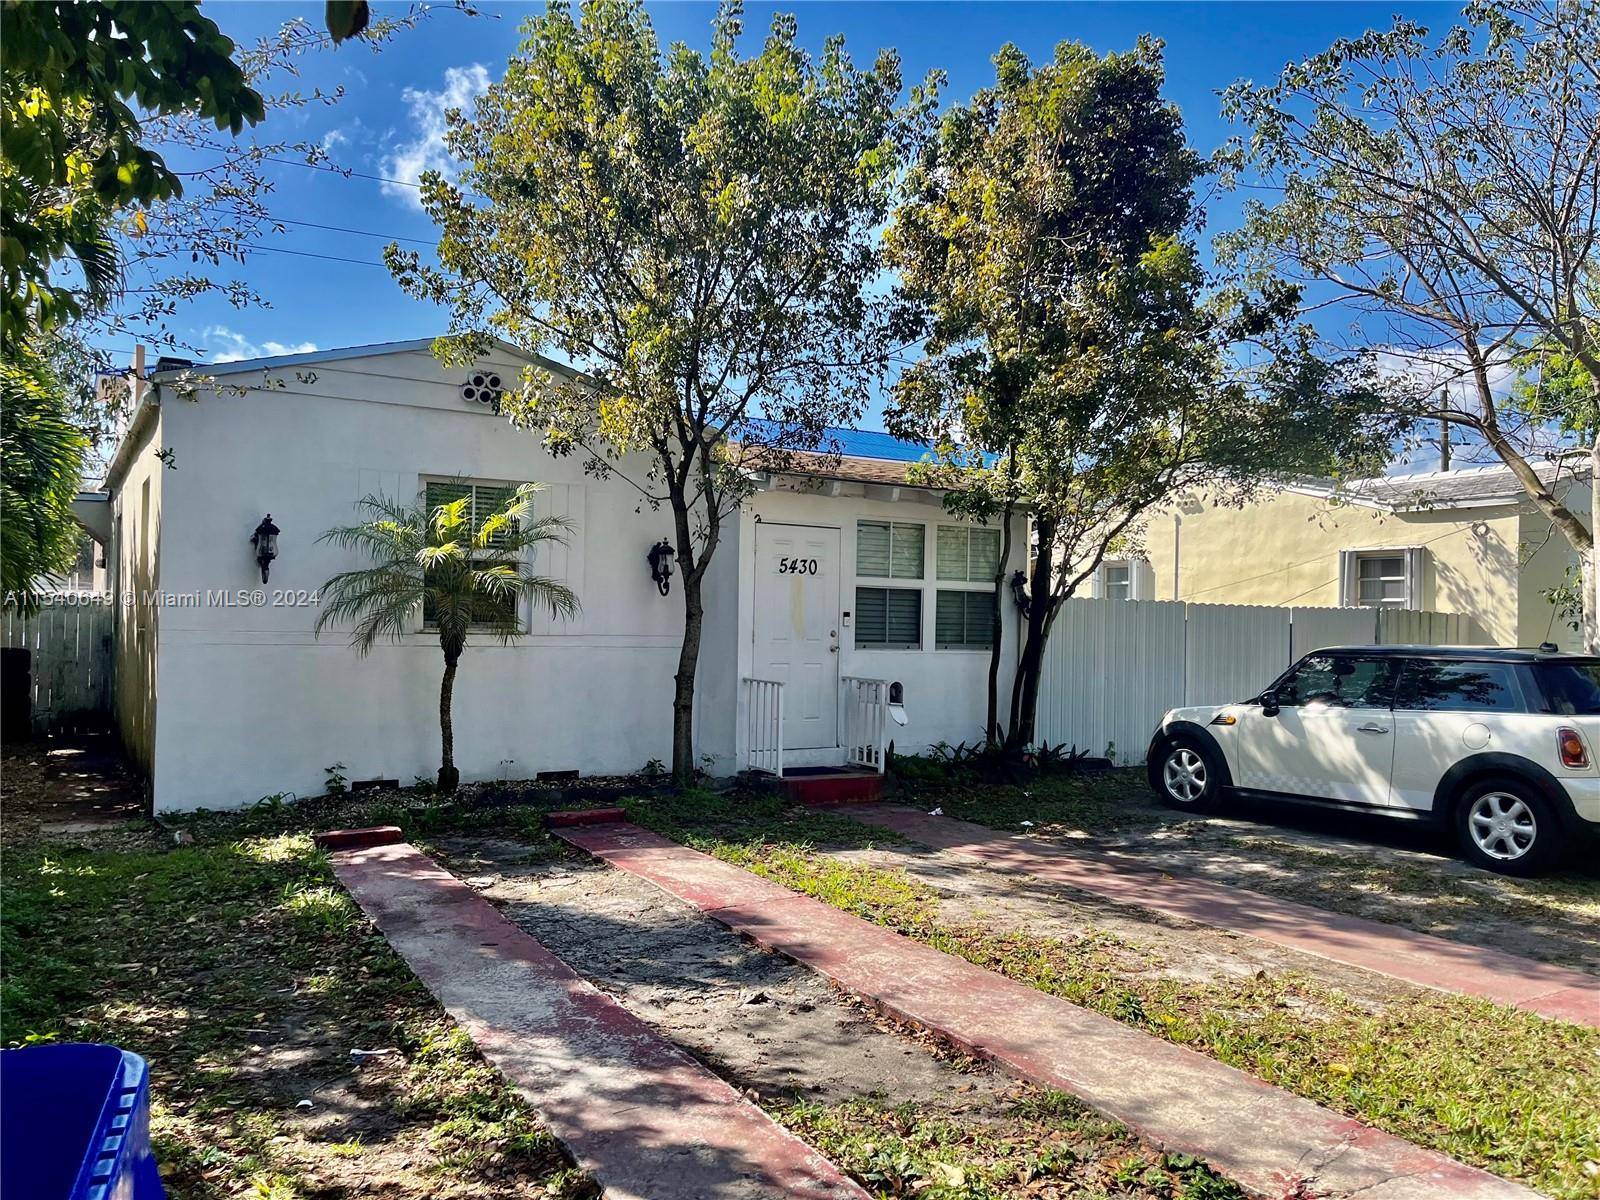 This single family home located in 5, 50 SF lot, No HOA, one floor with three beedrooms and 2 baths, laundry room, big and wide fenced patio.